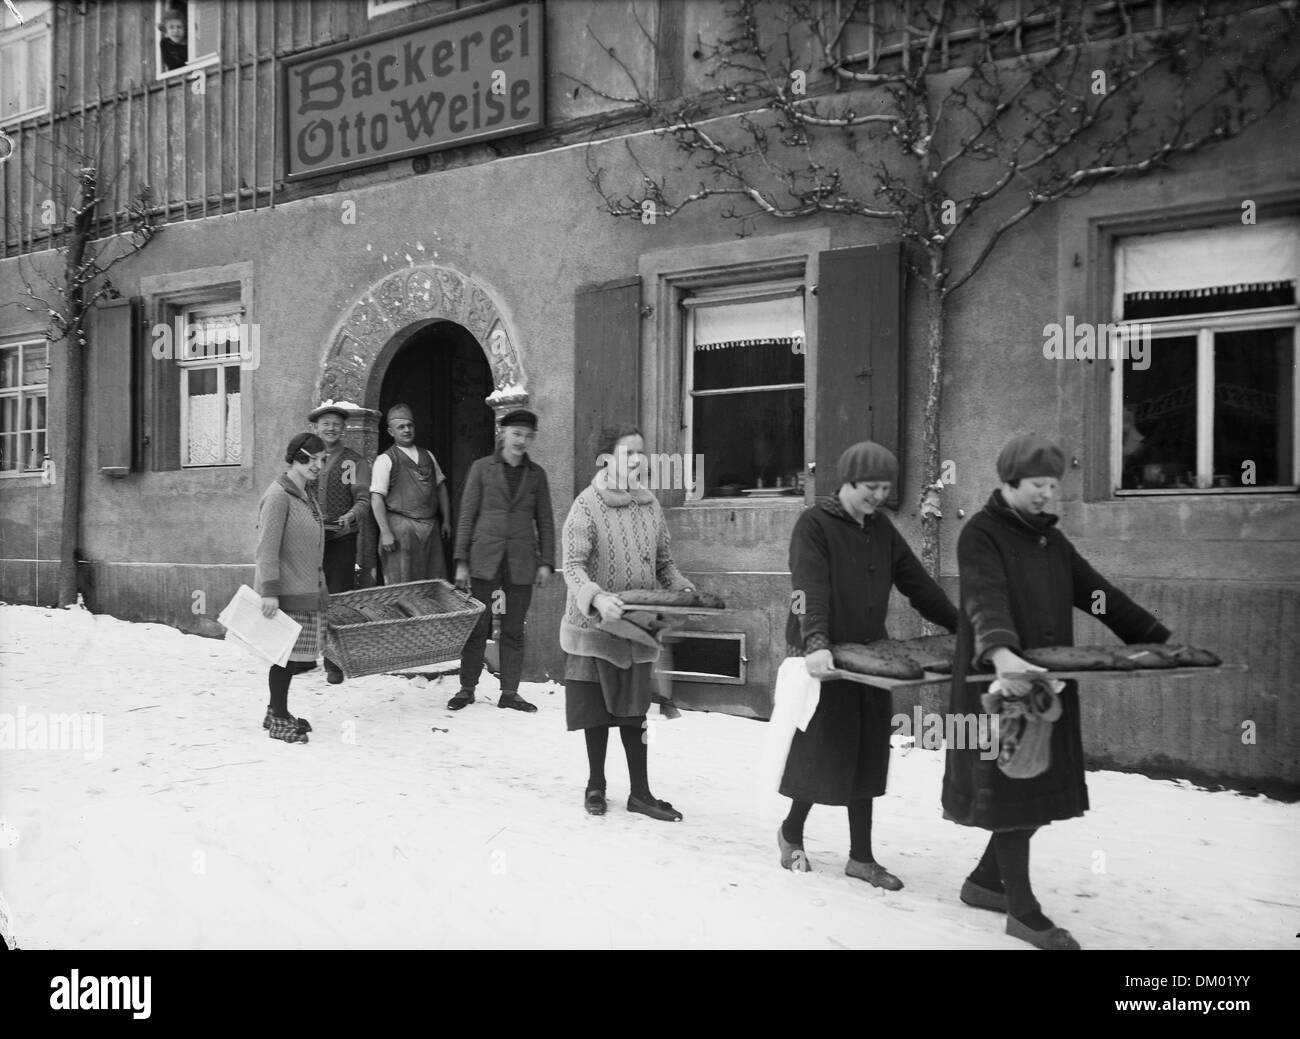 Women carry trays and a basket with stollen from the bakery Otto Weise at the market in Kohren-Salis, Germany. During Christmas time, it used to be normal for families to bring the ingredients into a bakery to have the great number of Christmas stollen baked in the big oven of the bakery. Photo: Deutsche Fotothek/Johannes Müller Stock Photo